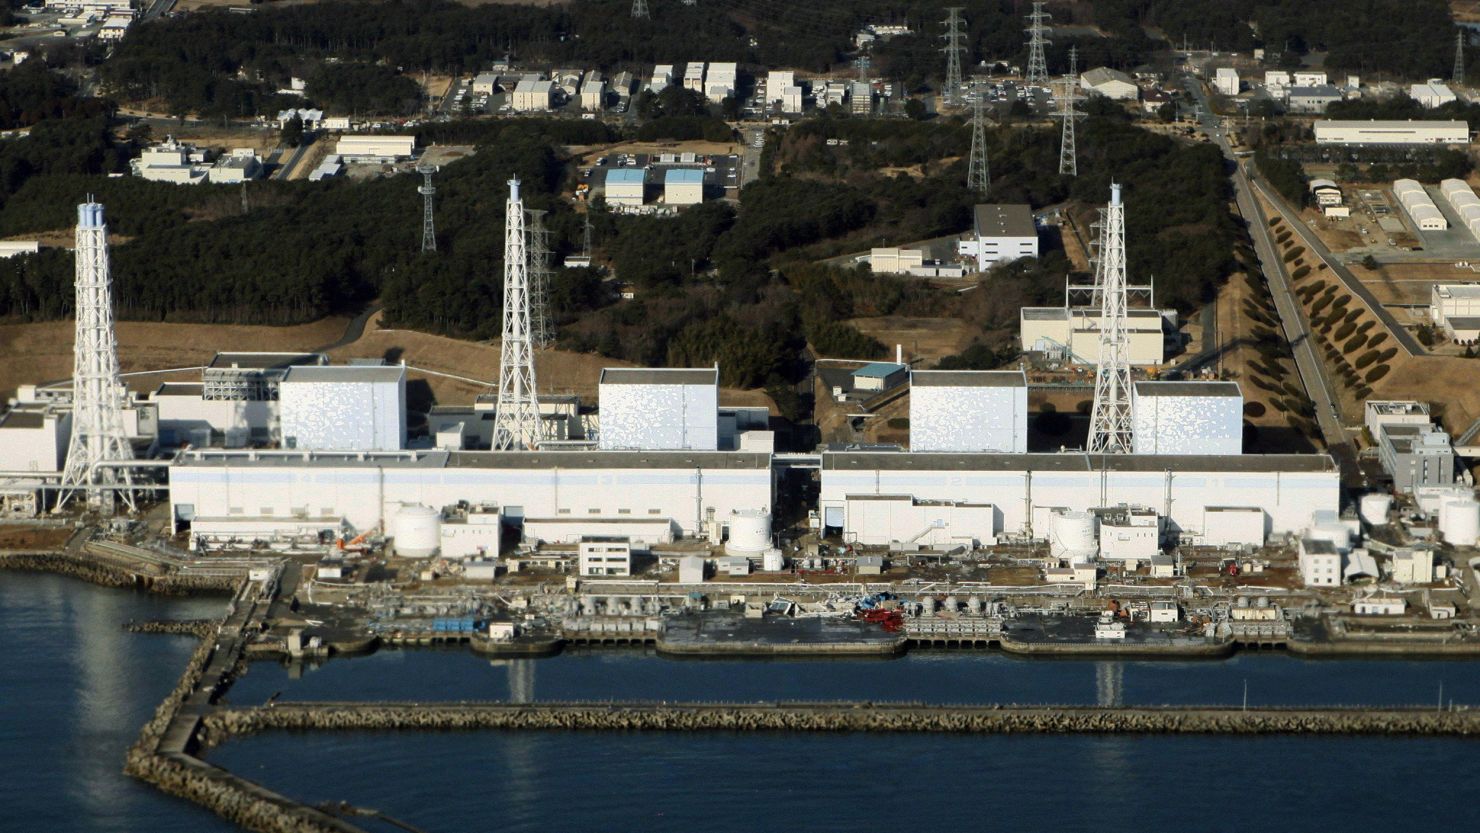 An aerial view shows the quake-damaged Fukushima nuclear power plant in the Japanese town of Futaba, Fukushima prefecture on March 12, 2011. 